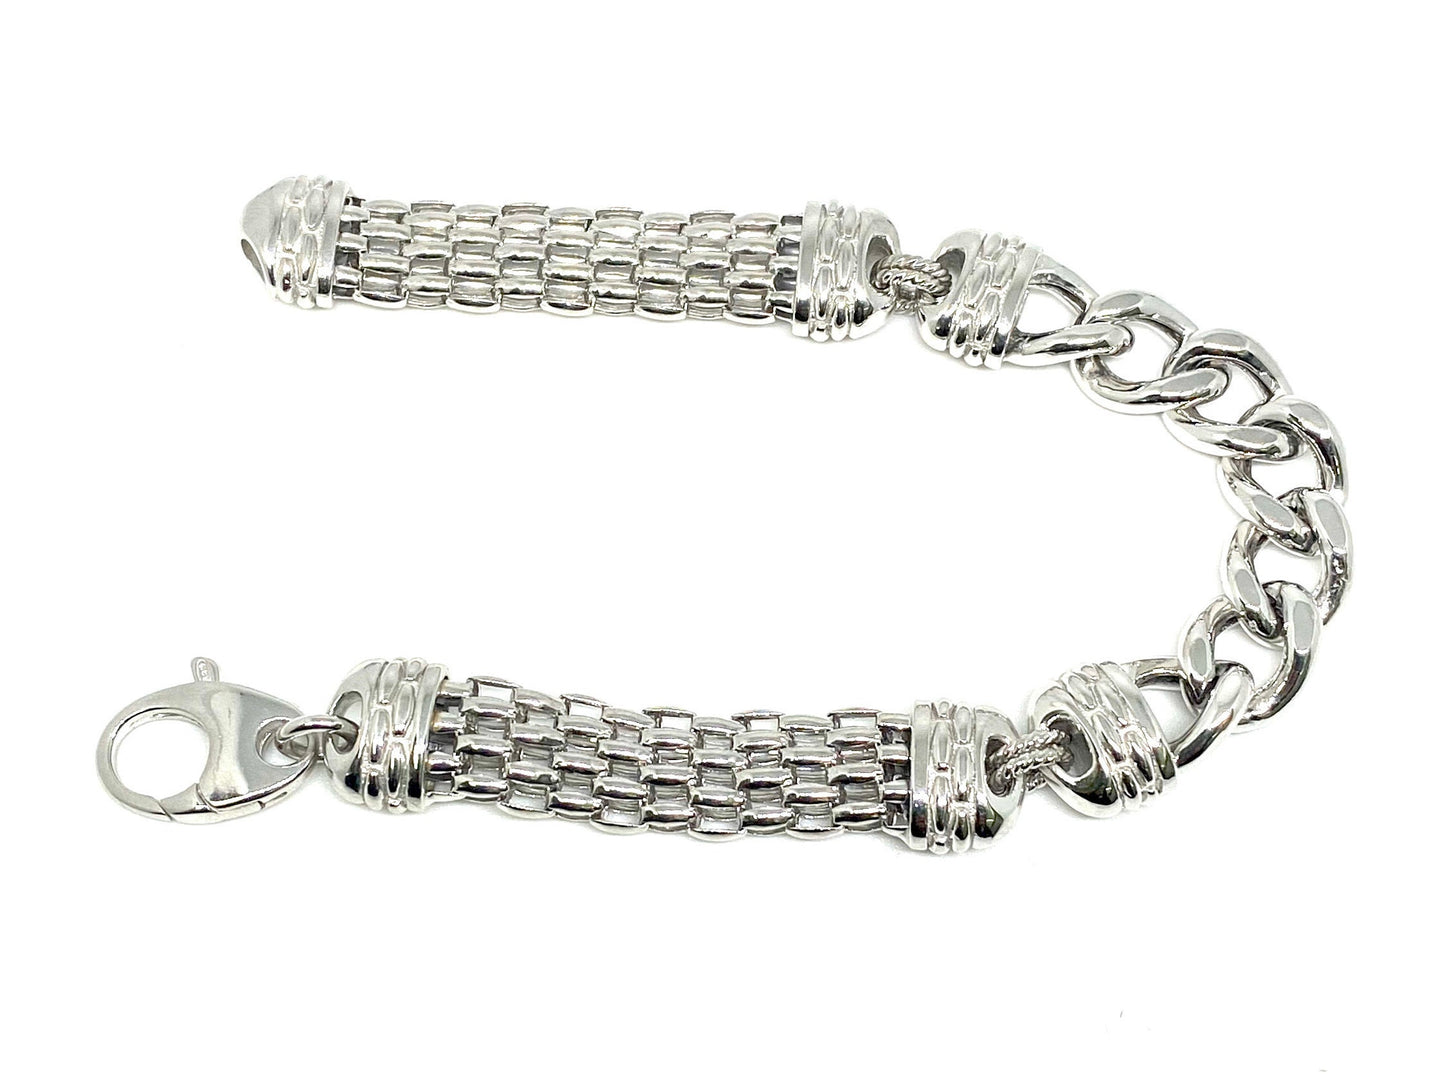 Popcorn and Curb Link Chain Bracelet